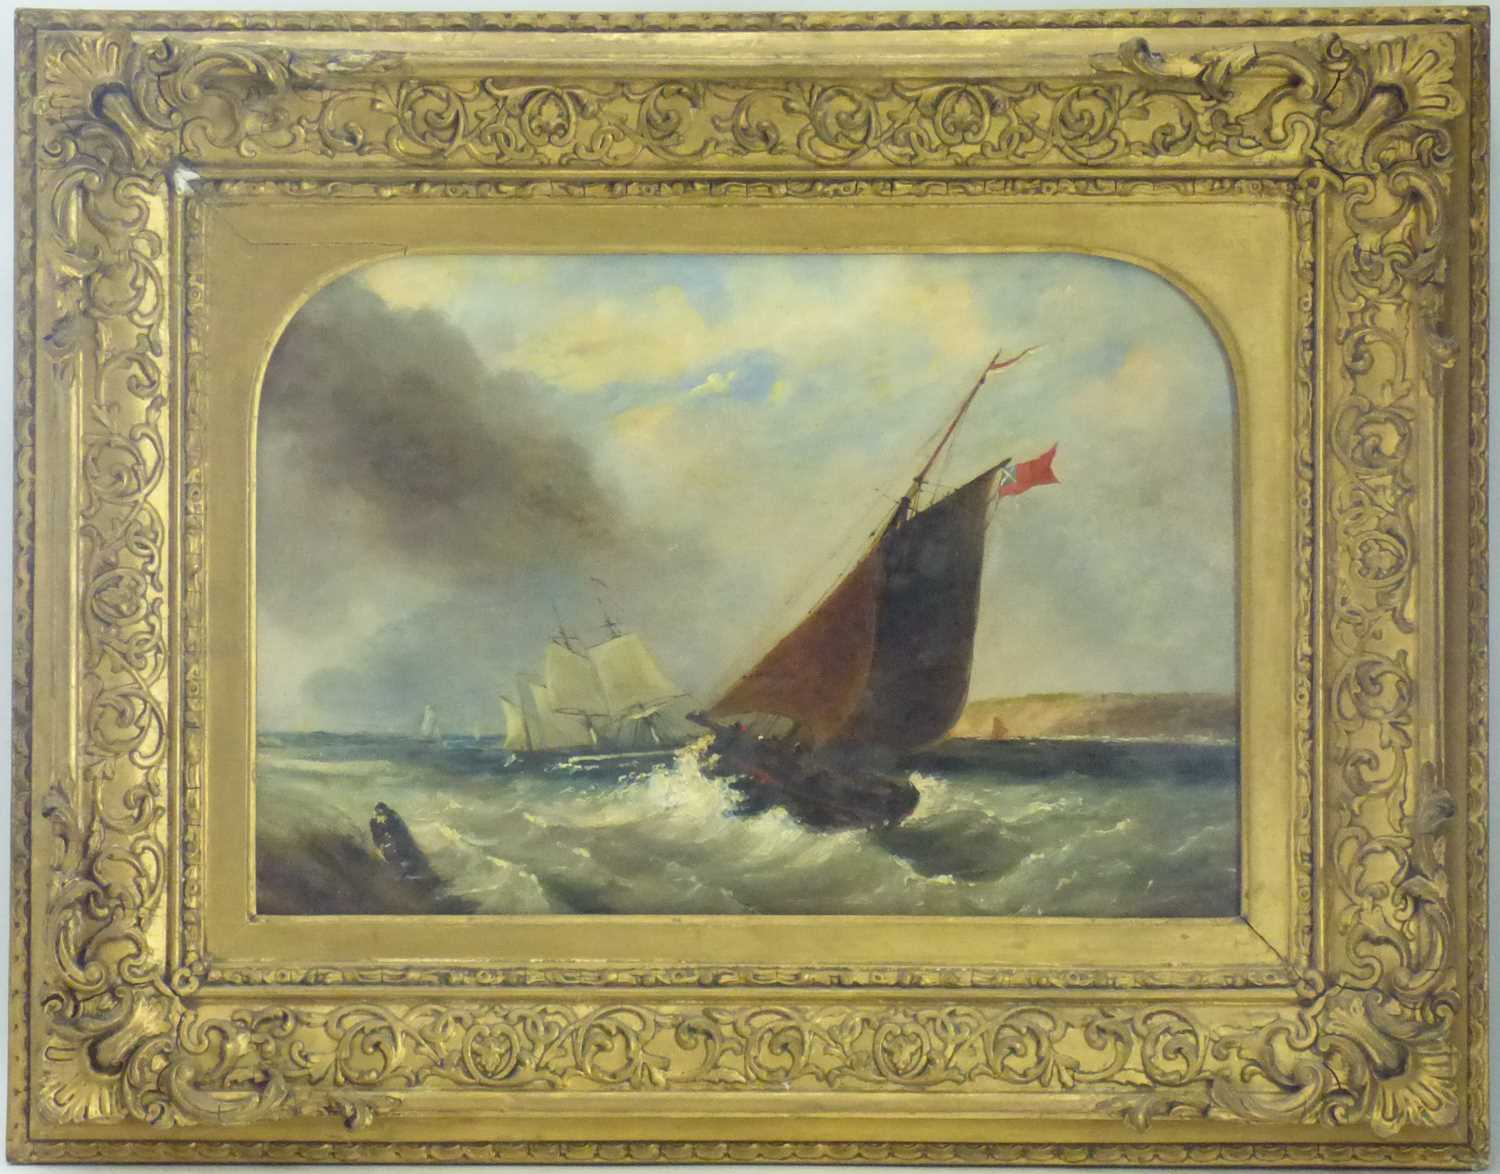 19TH CENTURY BRITISH; oil on board depicting a maritime scene of sailboats on a coastline, one